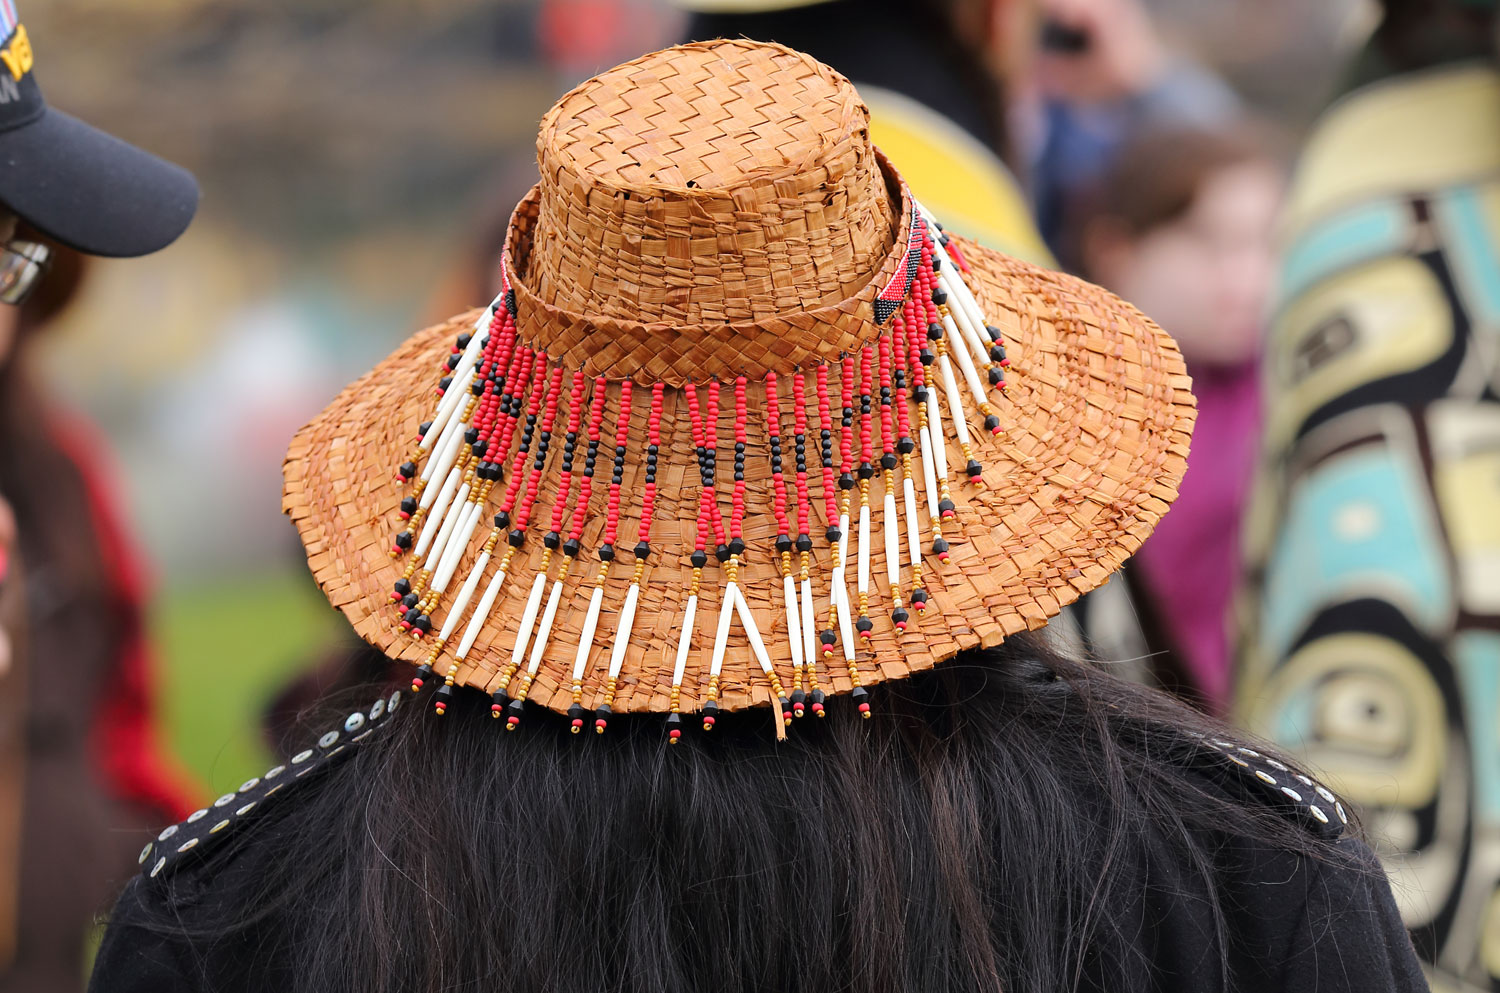 The beaded hatband can also be worn as a headband.